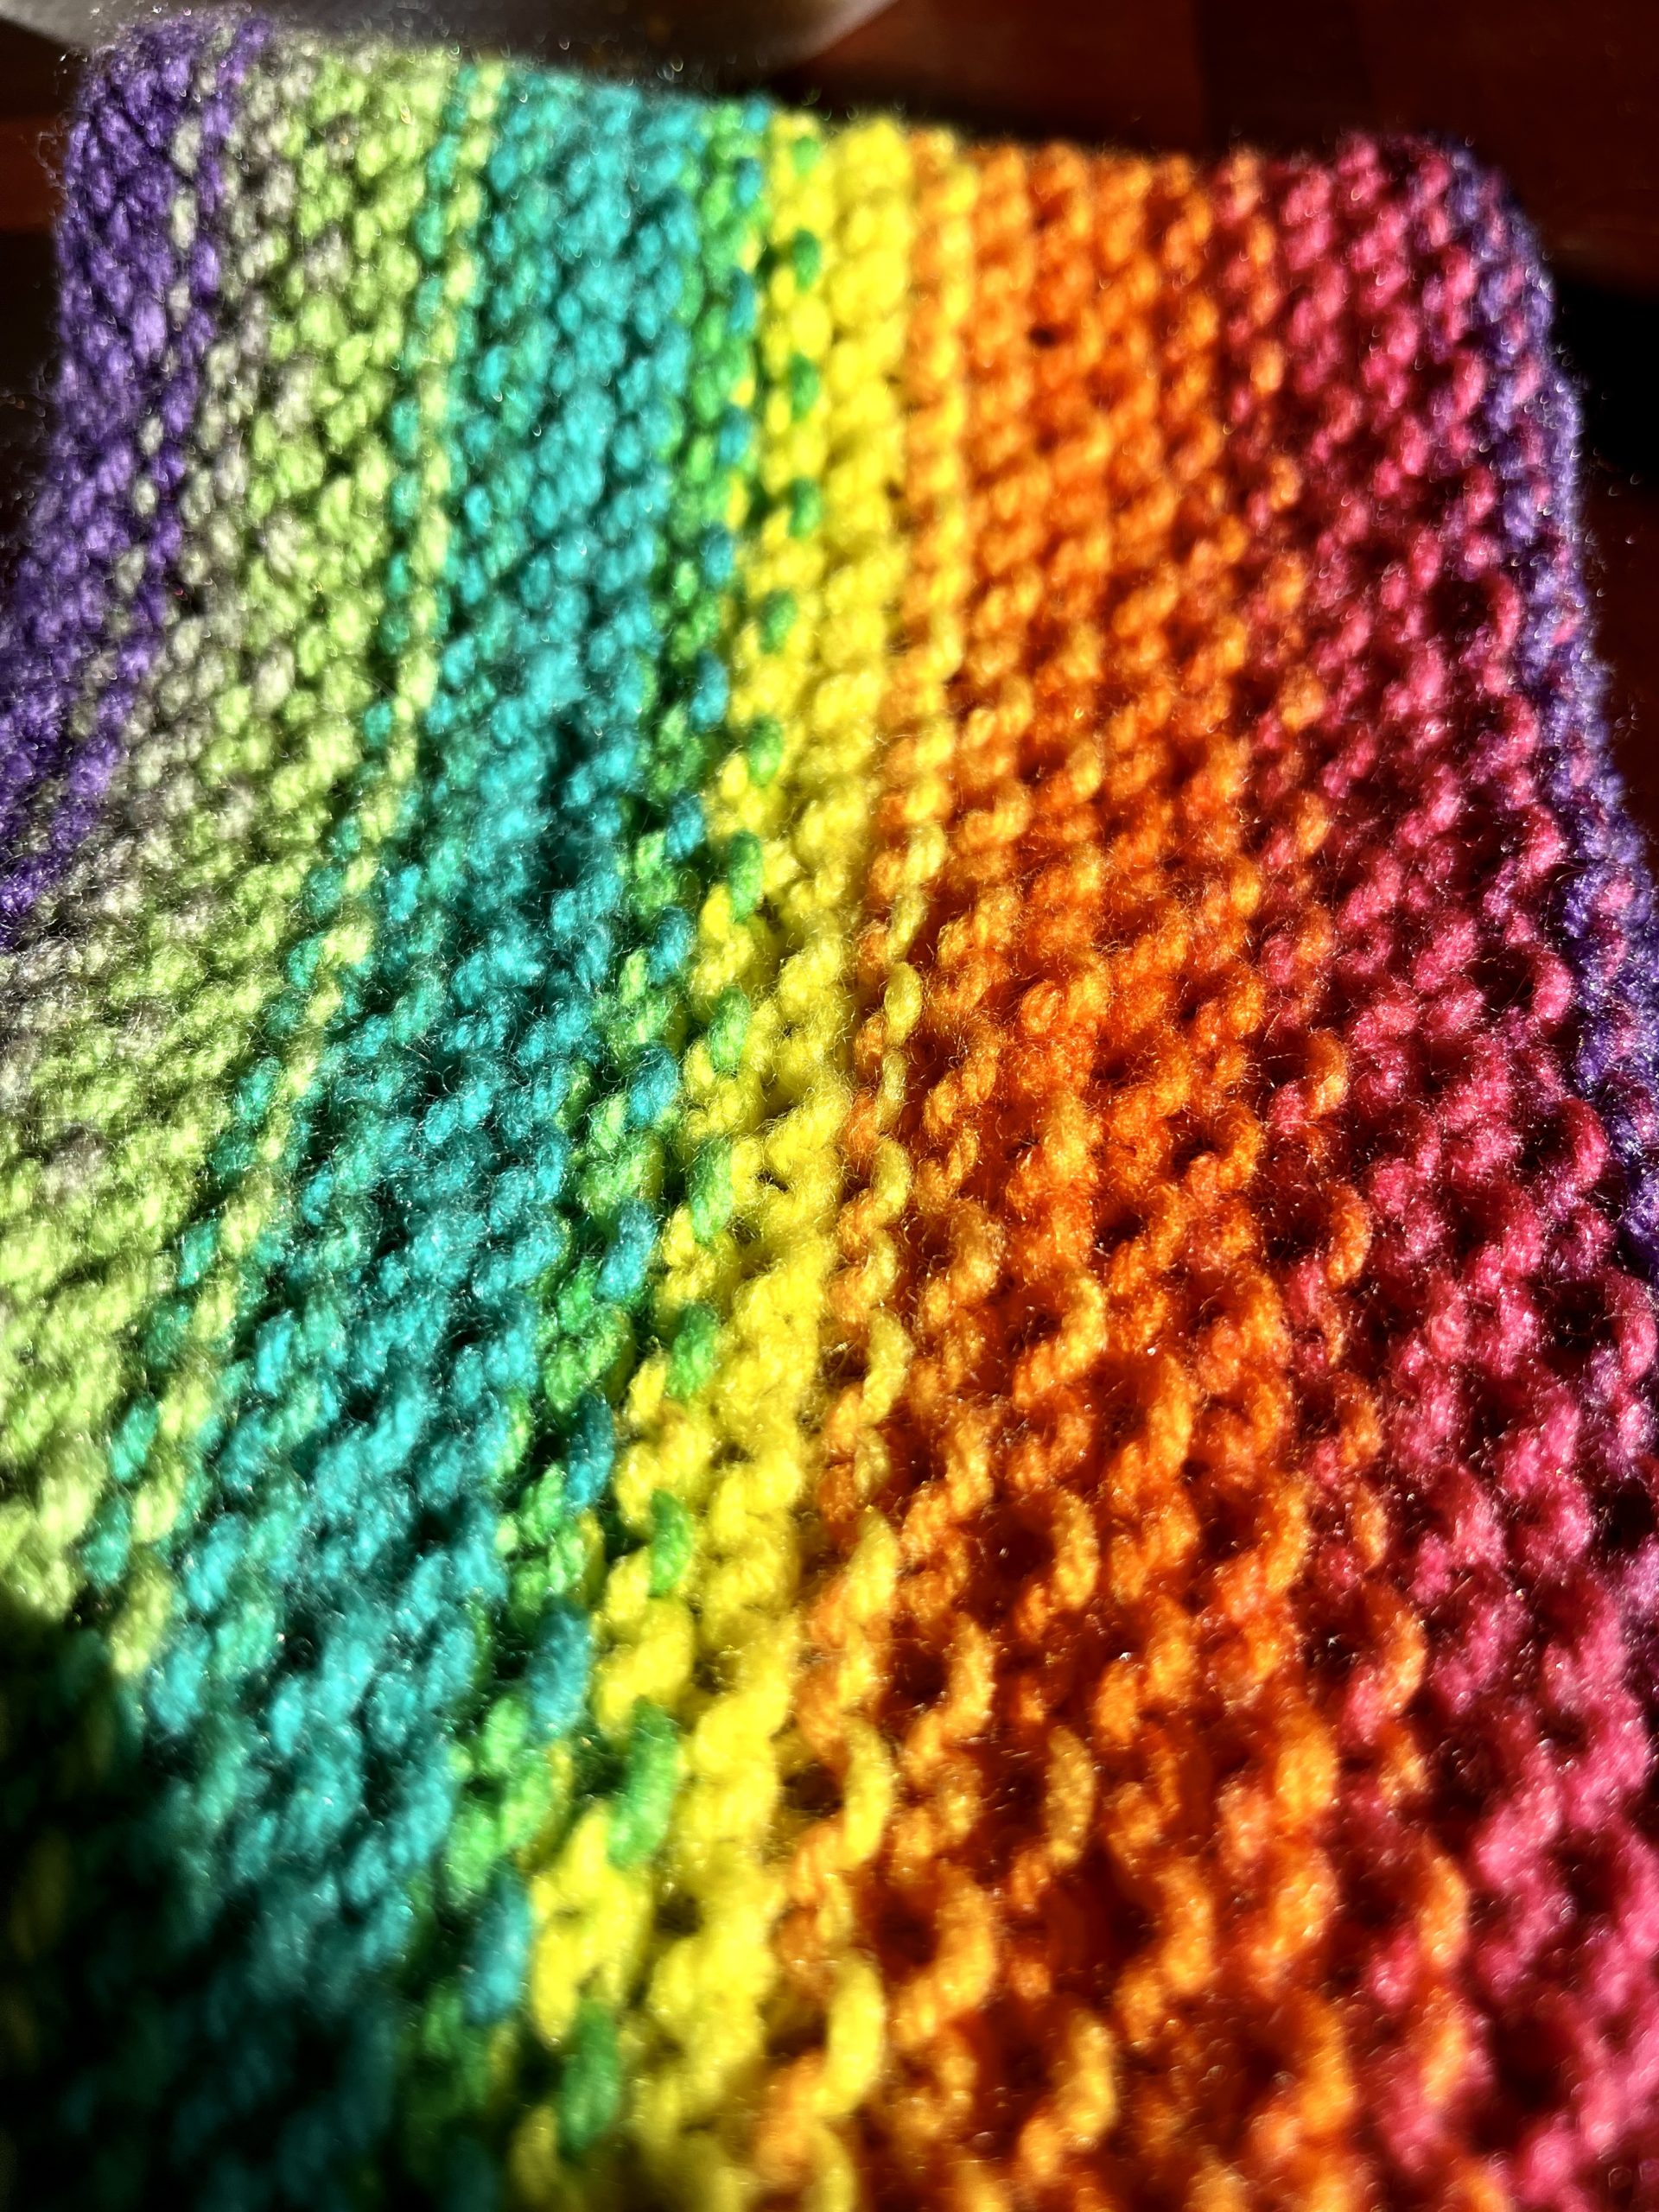 the wrong side of the Woven Rainbow Scarf